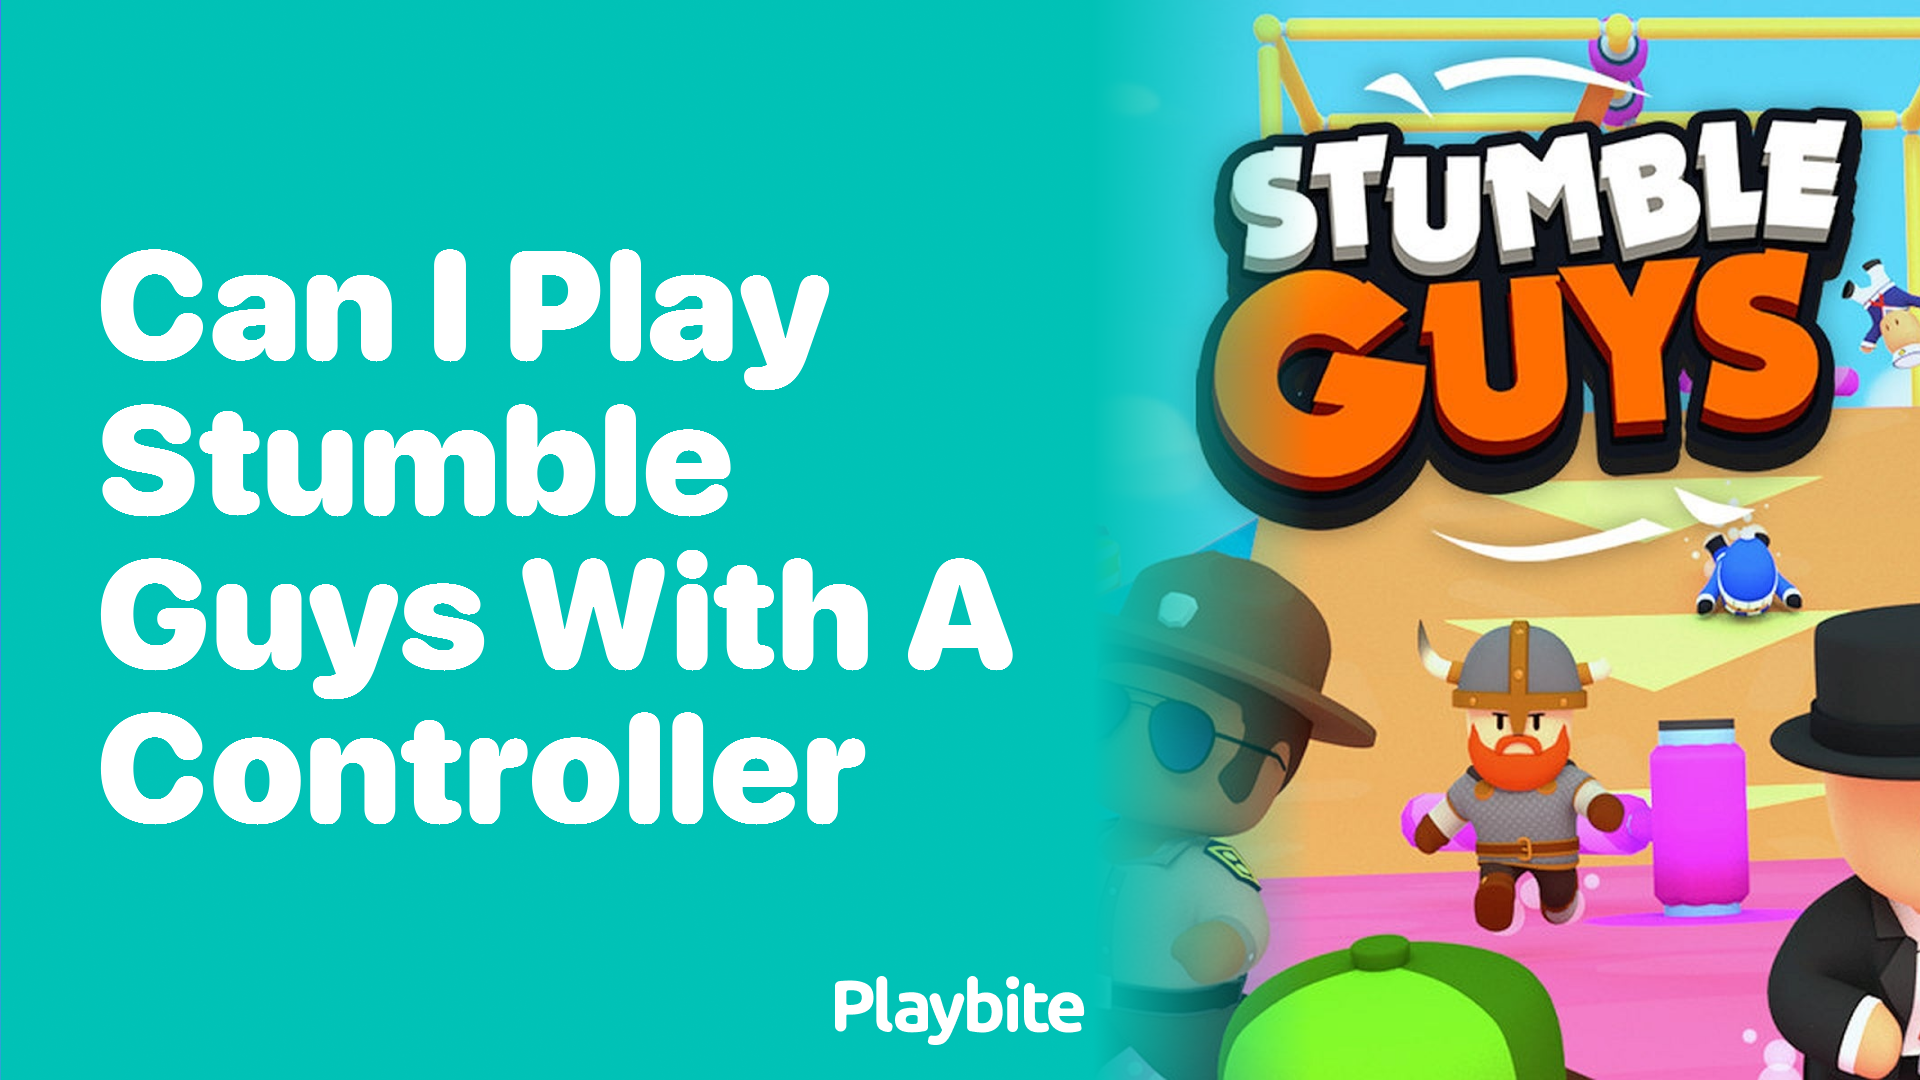 Can I Play Stumble Guys with a Controller? Find Out Here!